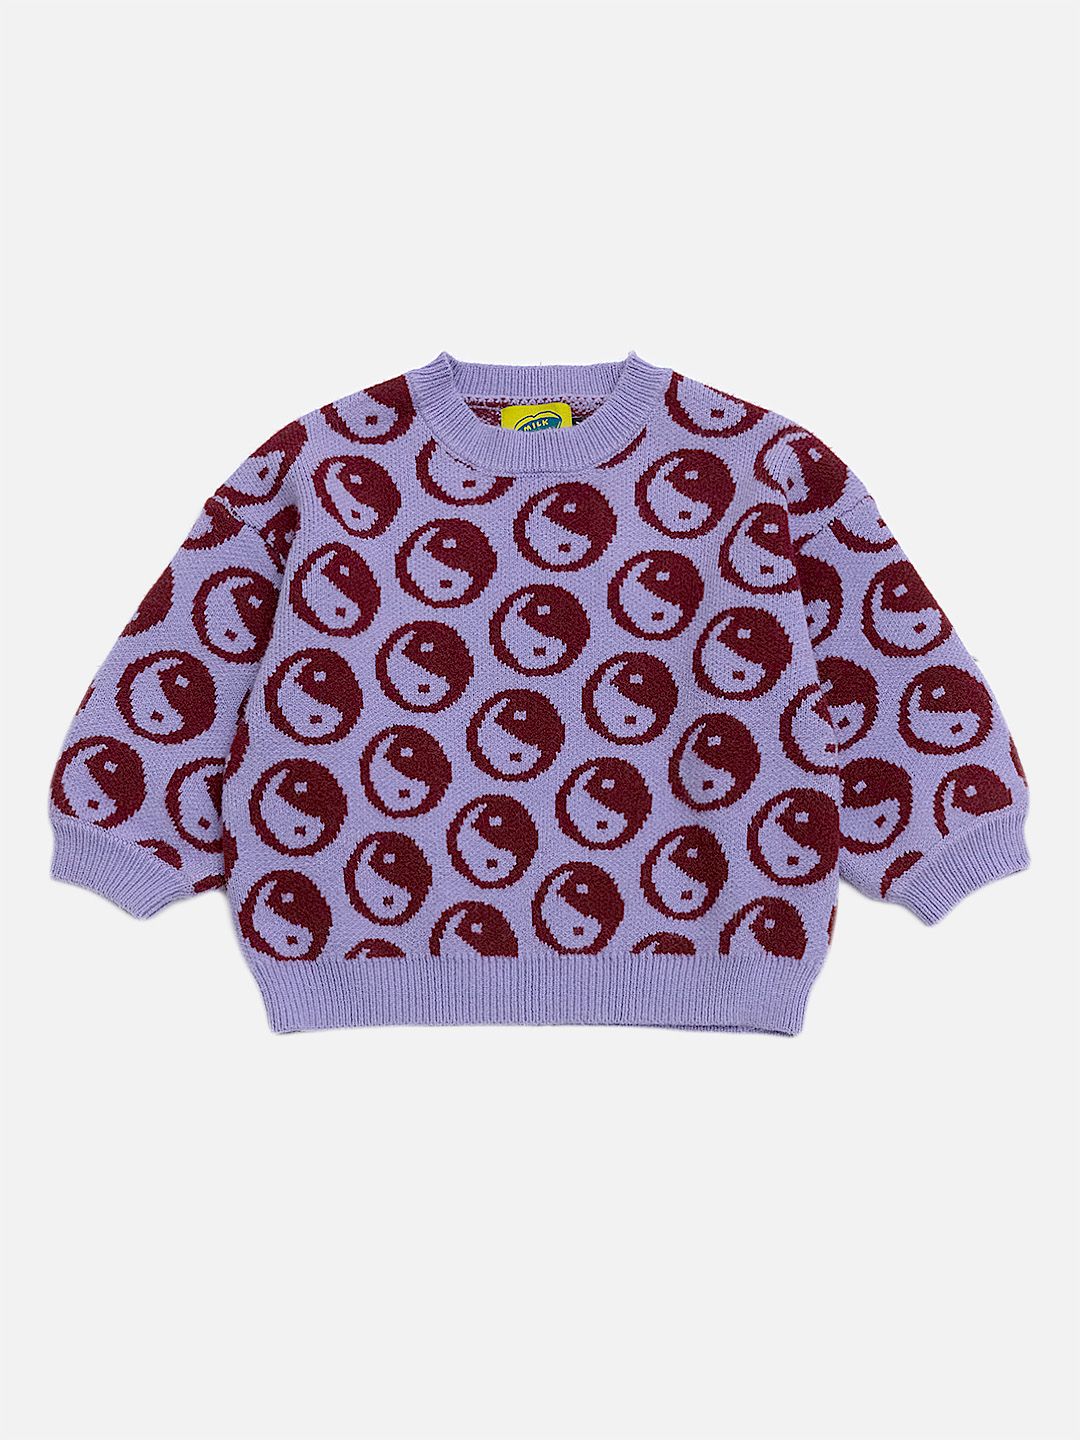 A kids' sweater with dark red yin and yang circles on a violet background, front view